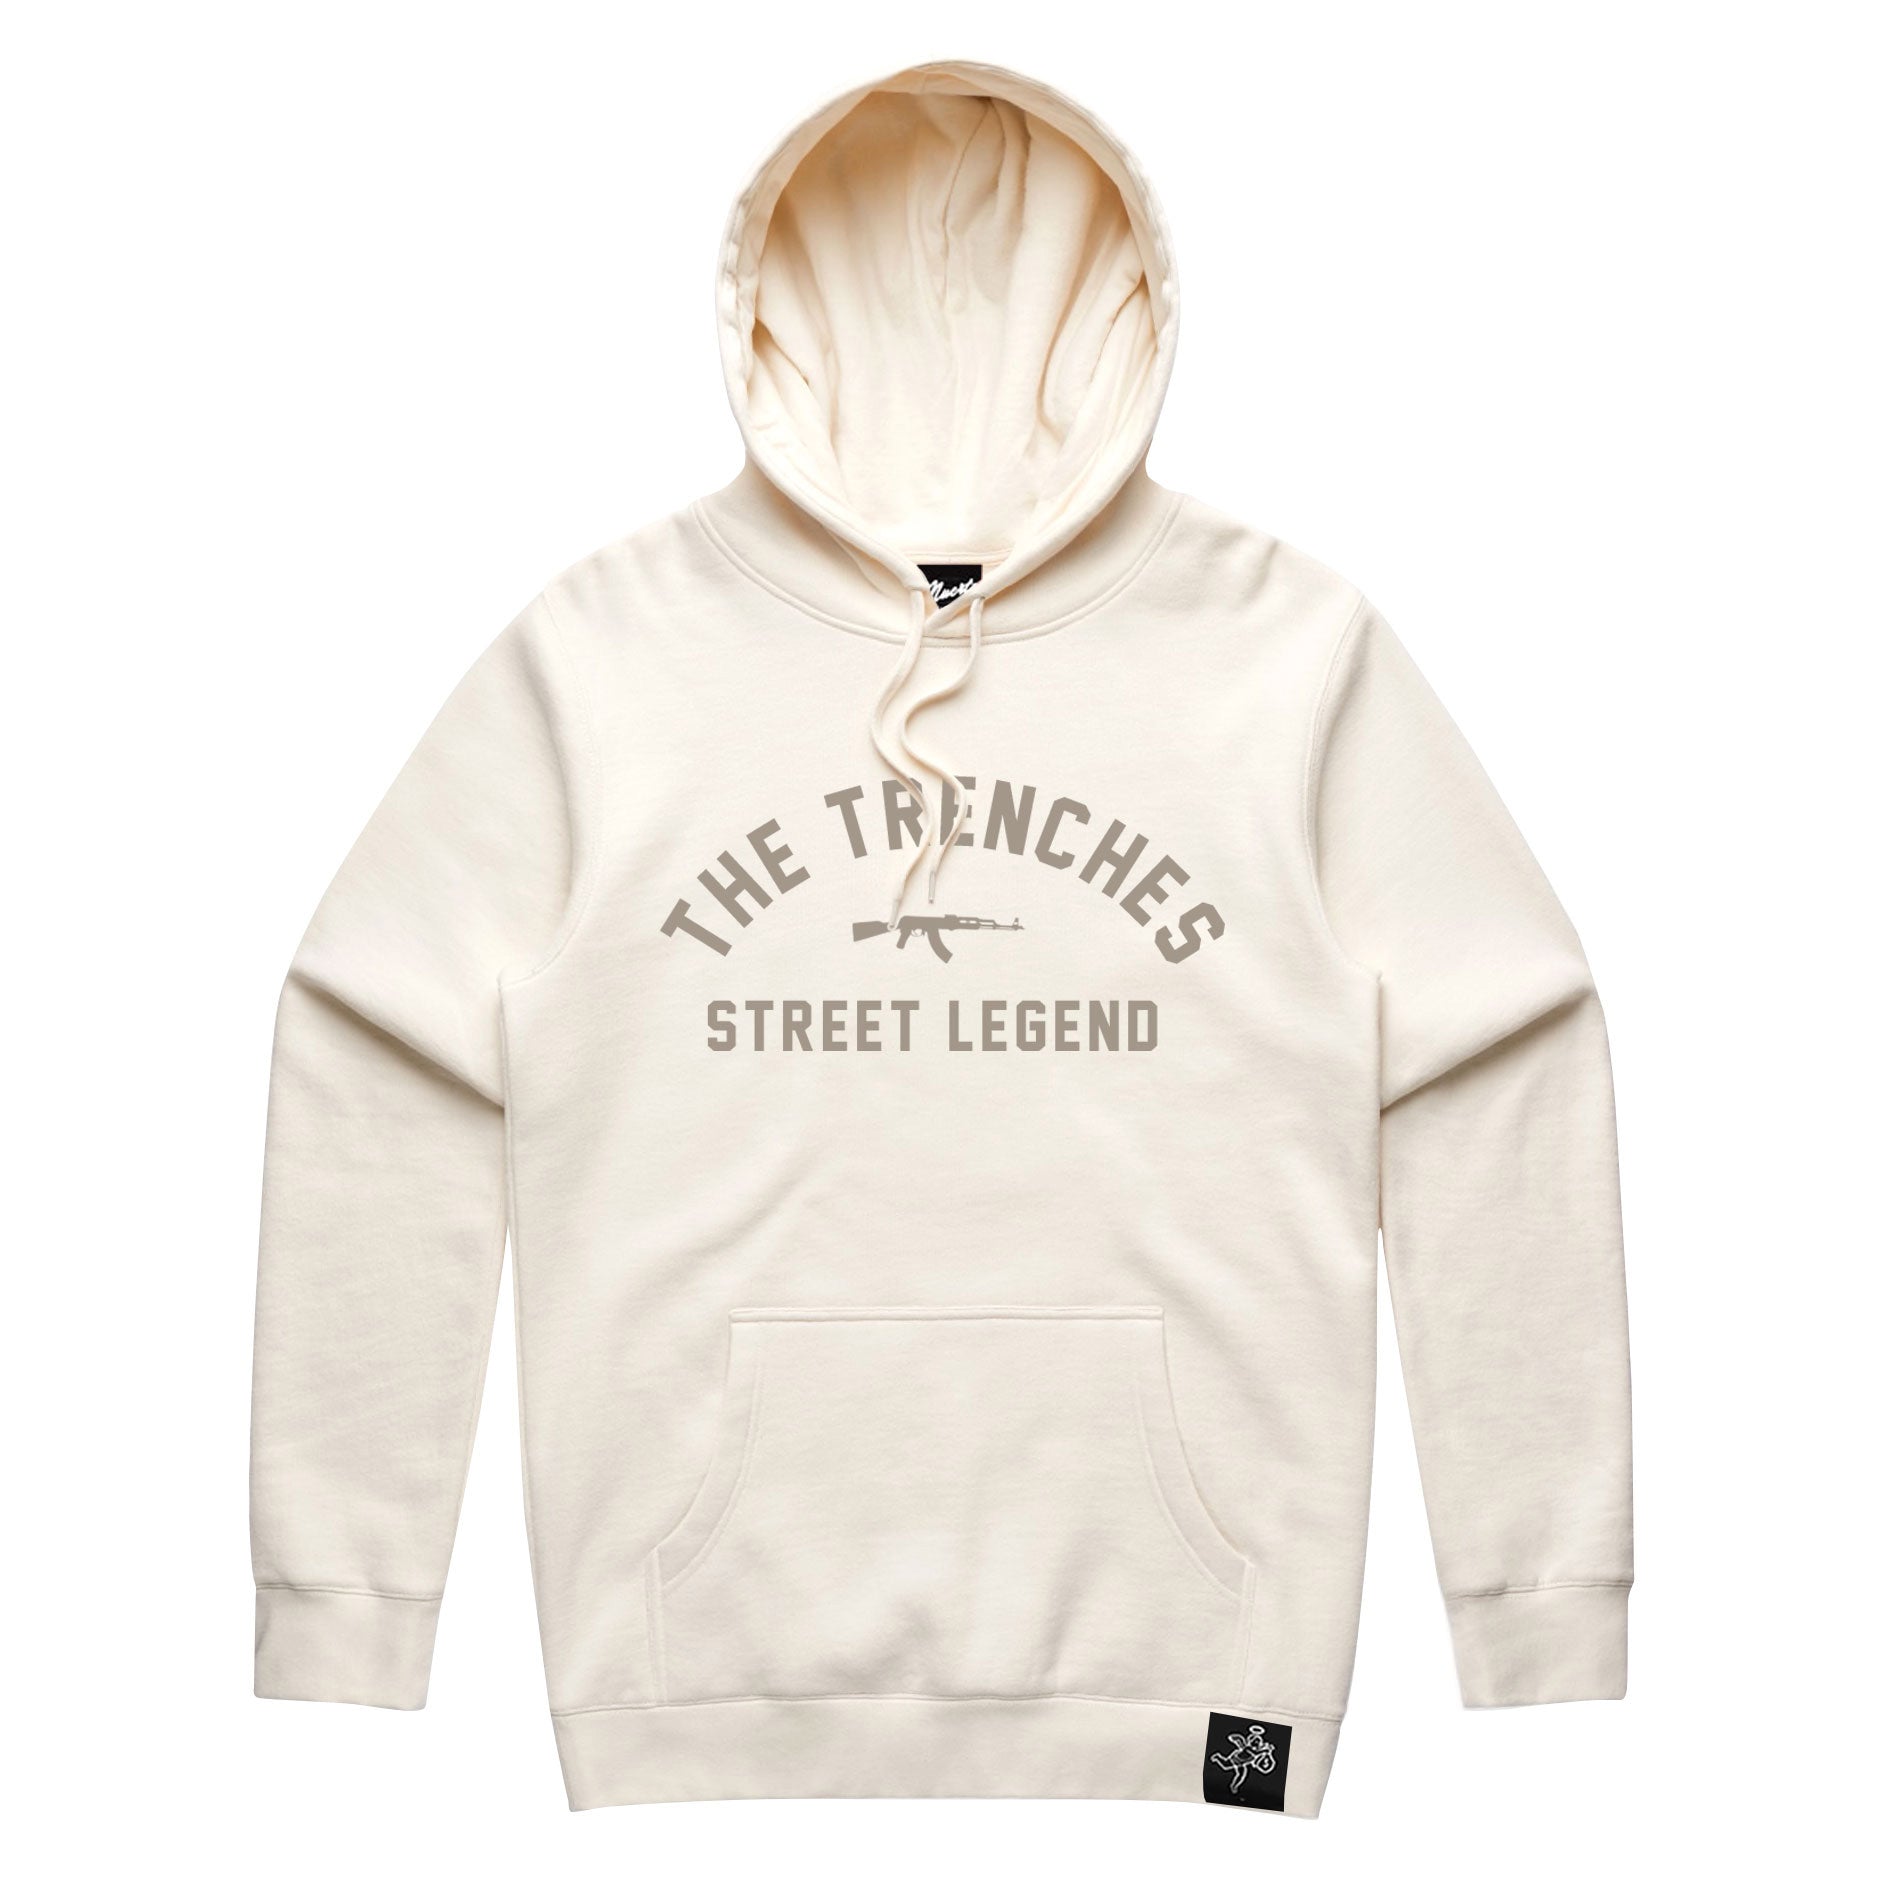 AK The Trenches Hoodie